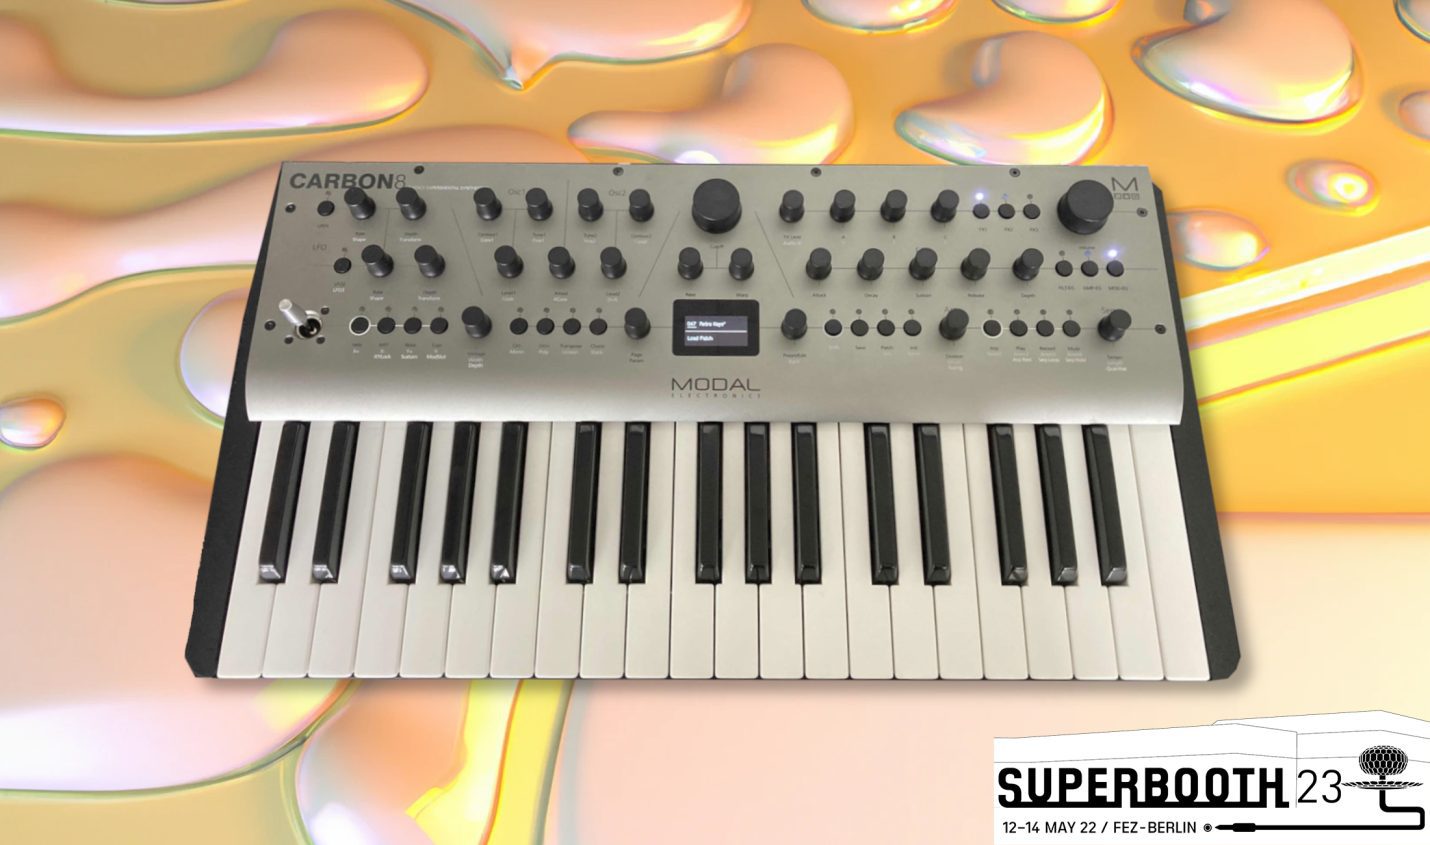 Superbooth 23: Modal Electronics Carbon8 – Prototyp des Phase-Distortion-Synthies